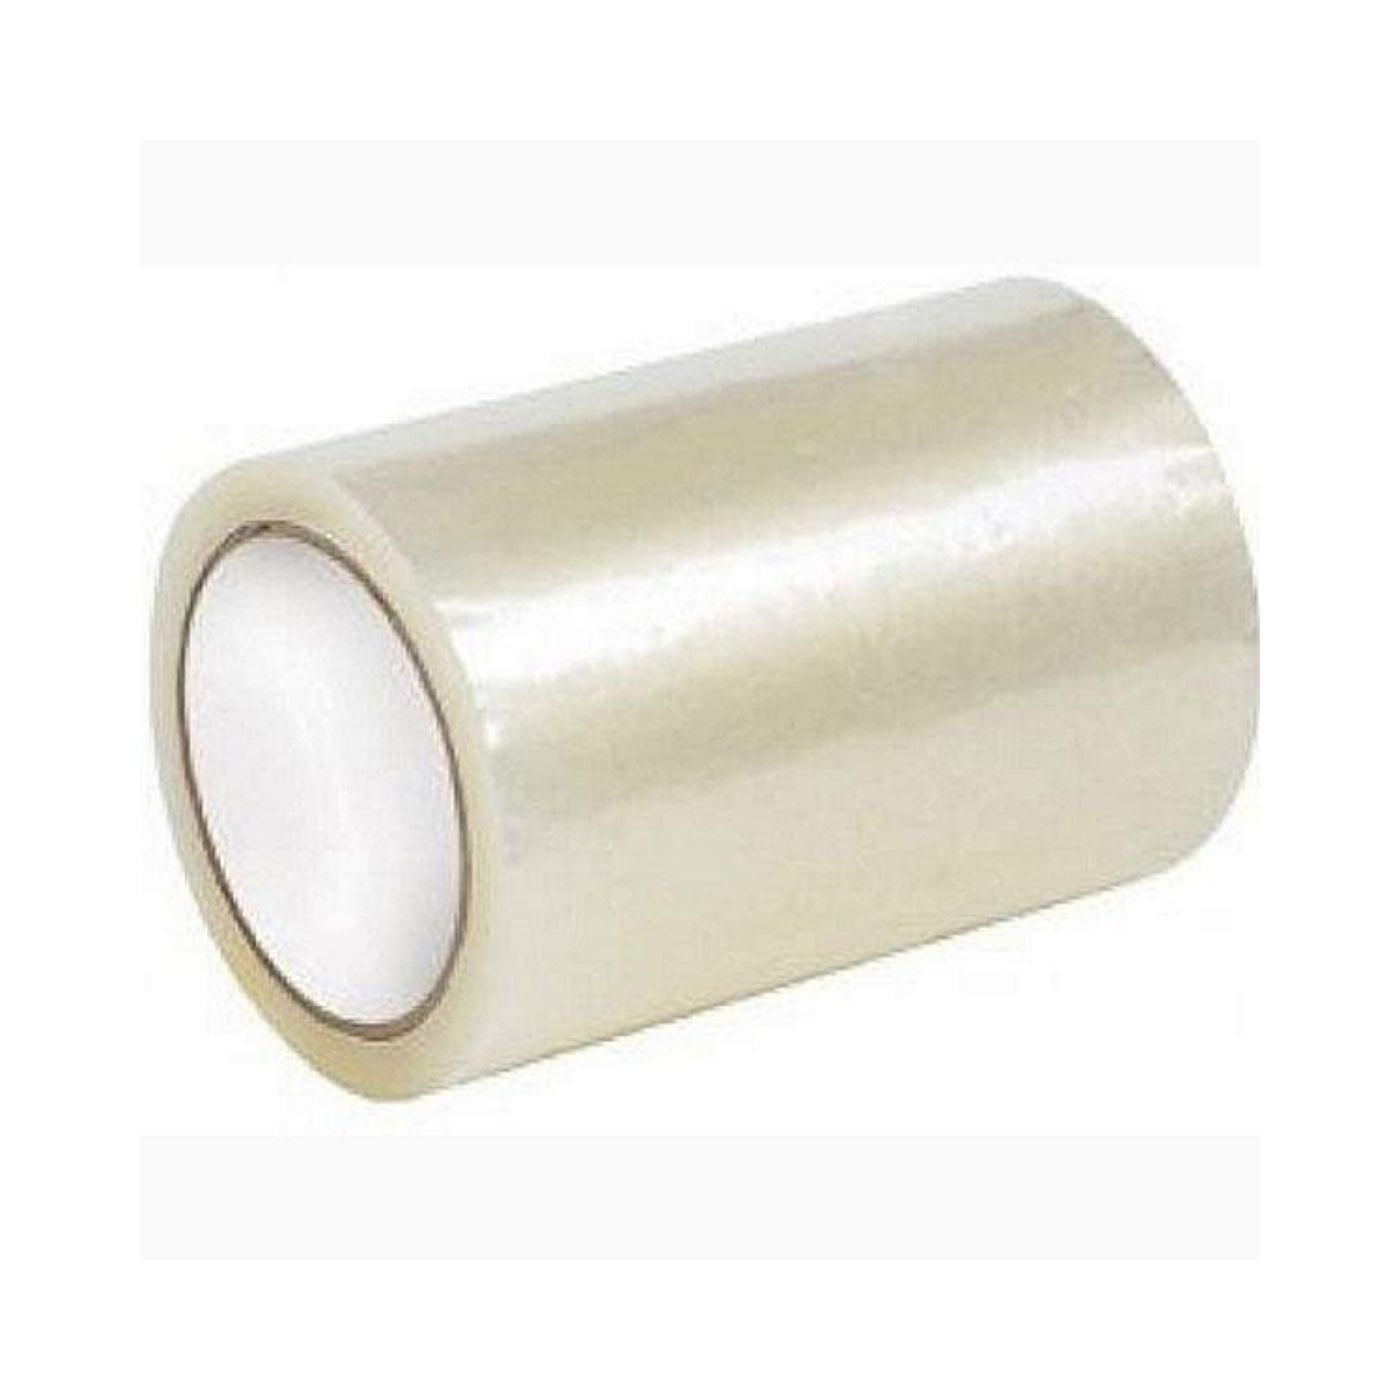 full case of 16 rolls! Merco Cold Weather FSK Tape 72mm x 55yd 